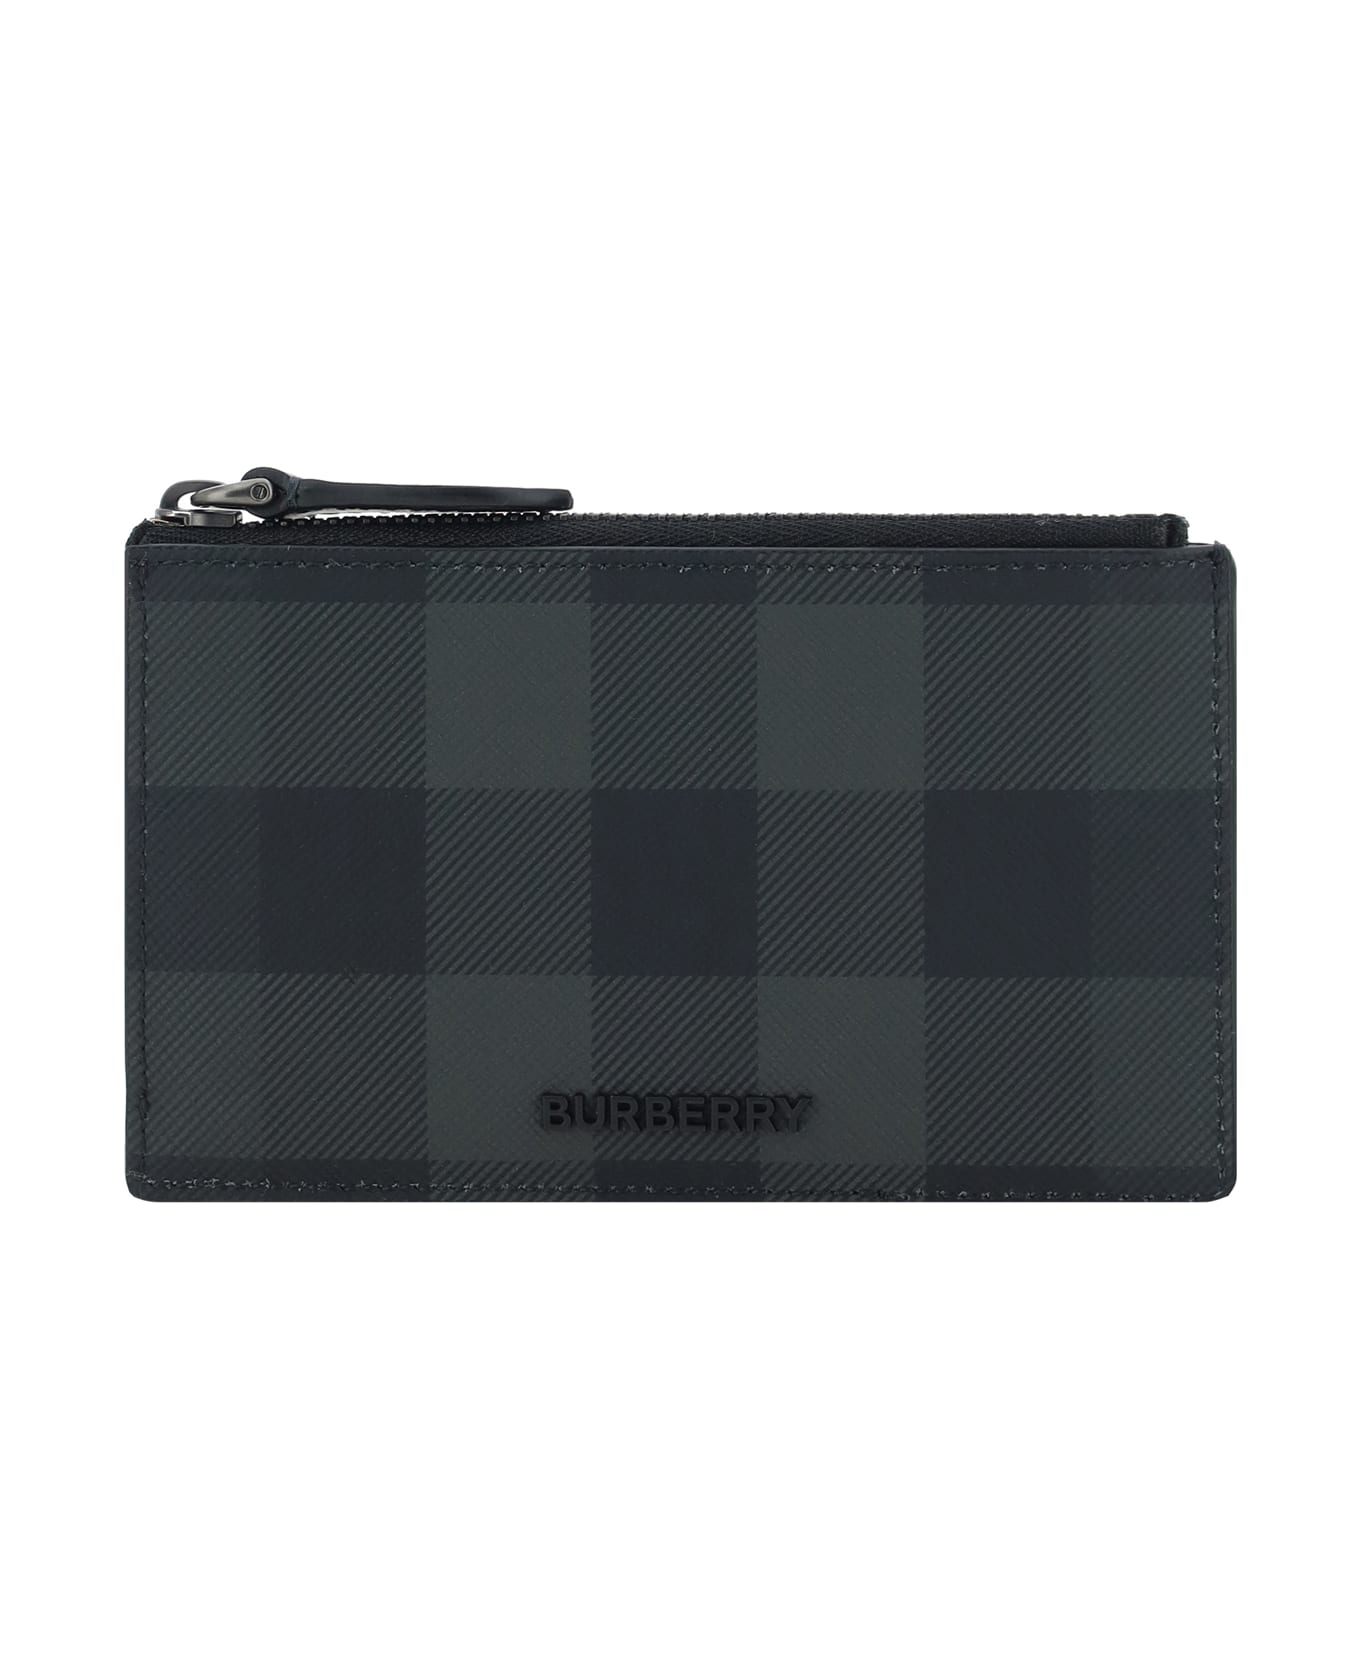 Burberry Coin Purse - Charcoal